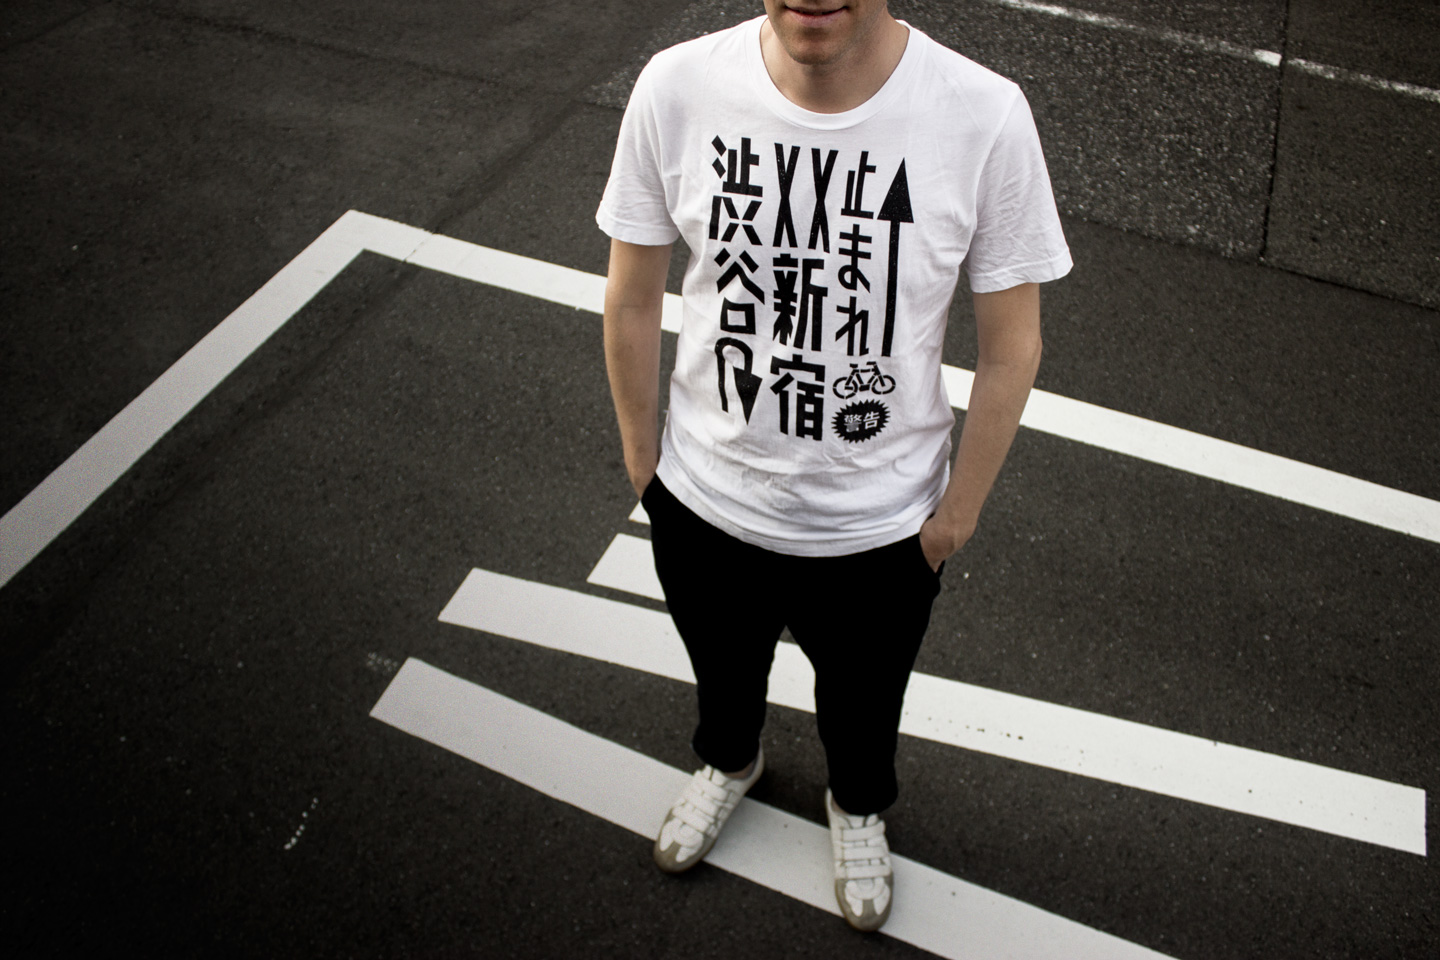 Tokyo Signs - Products inspired by the streets of Tokyo - Tokyo Roadmark Tshirt